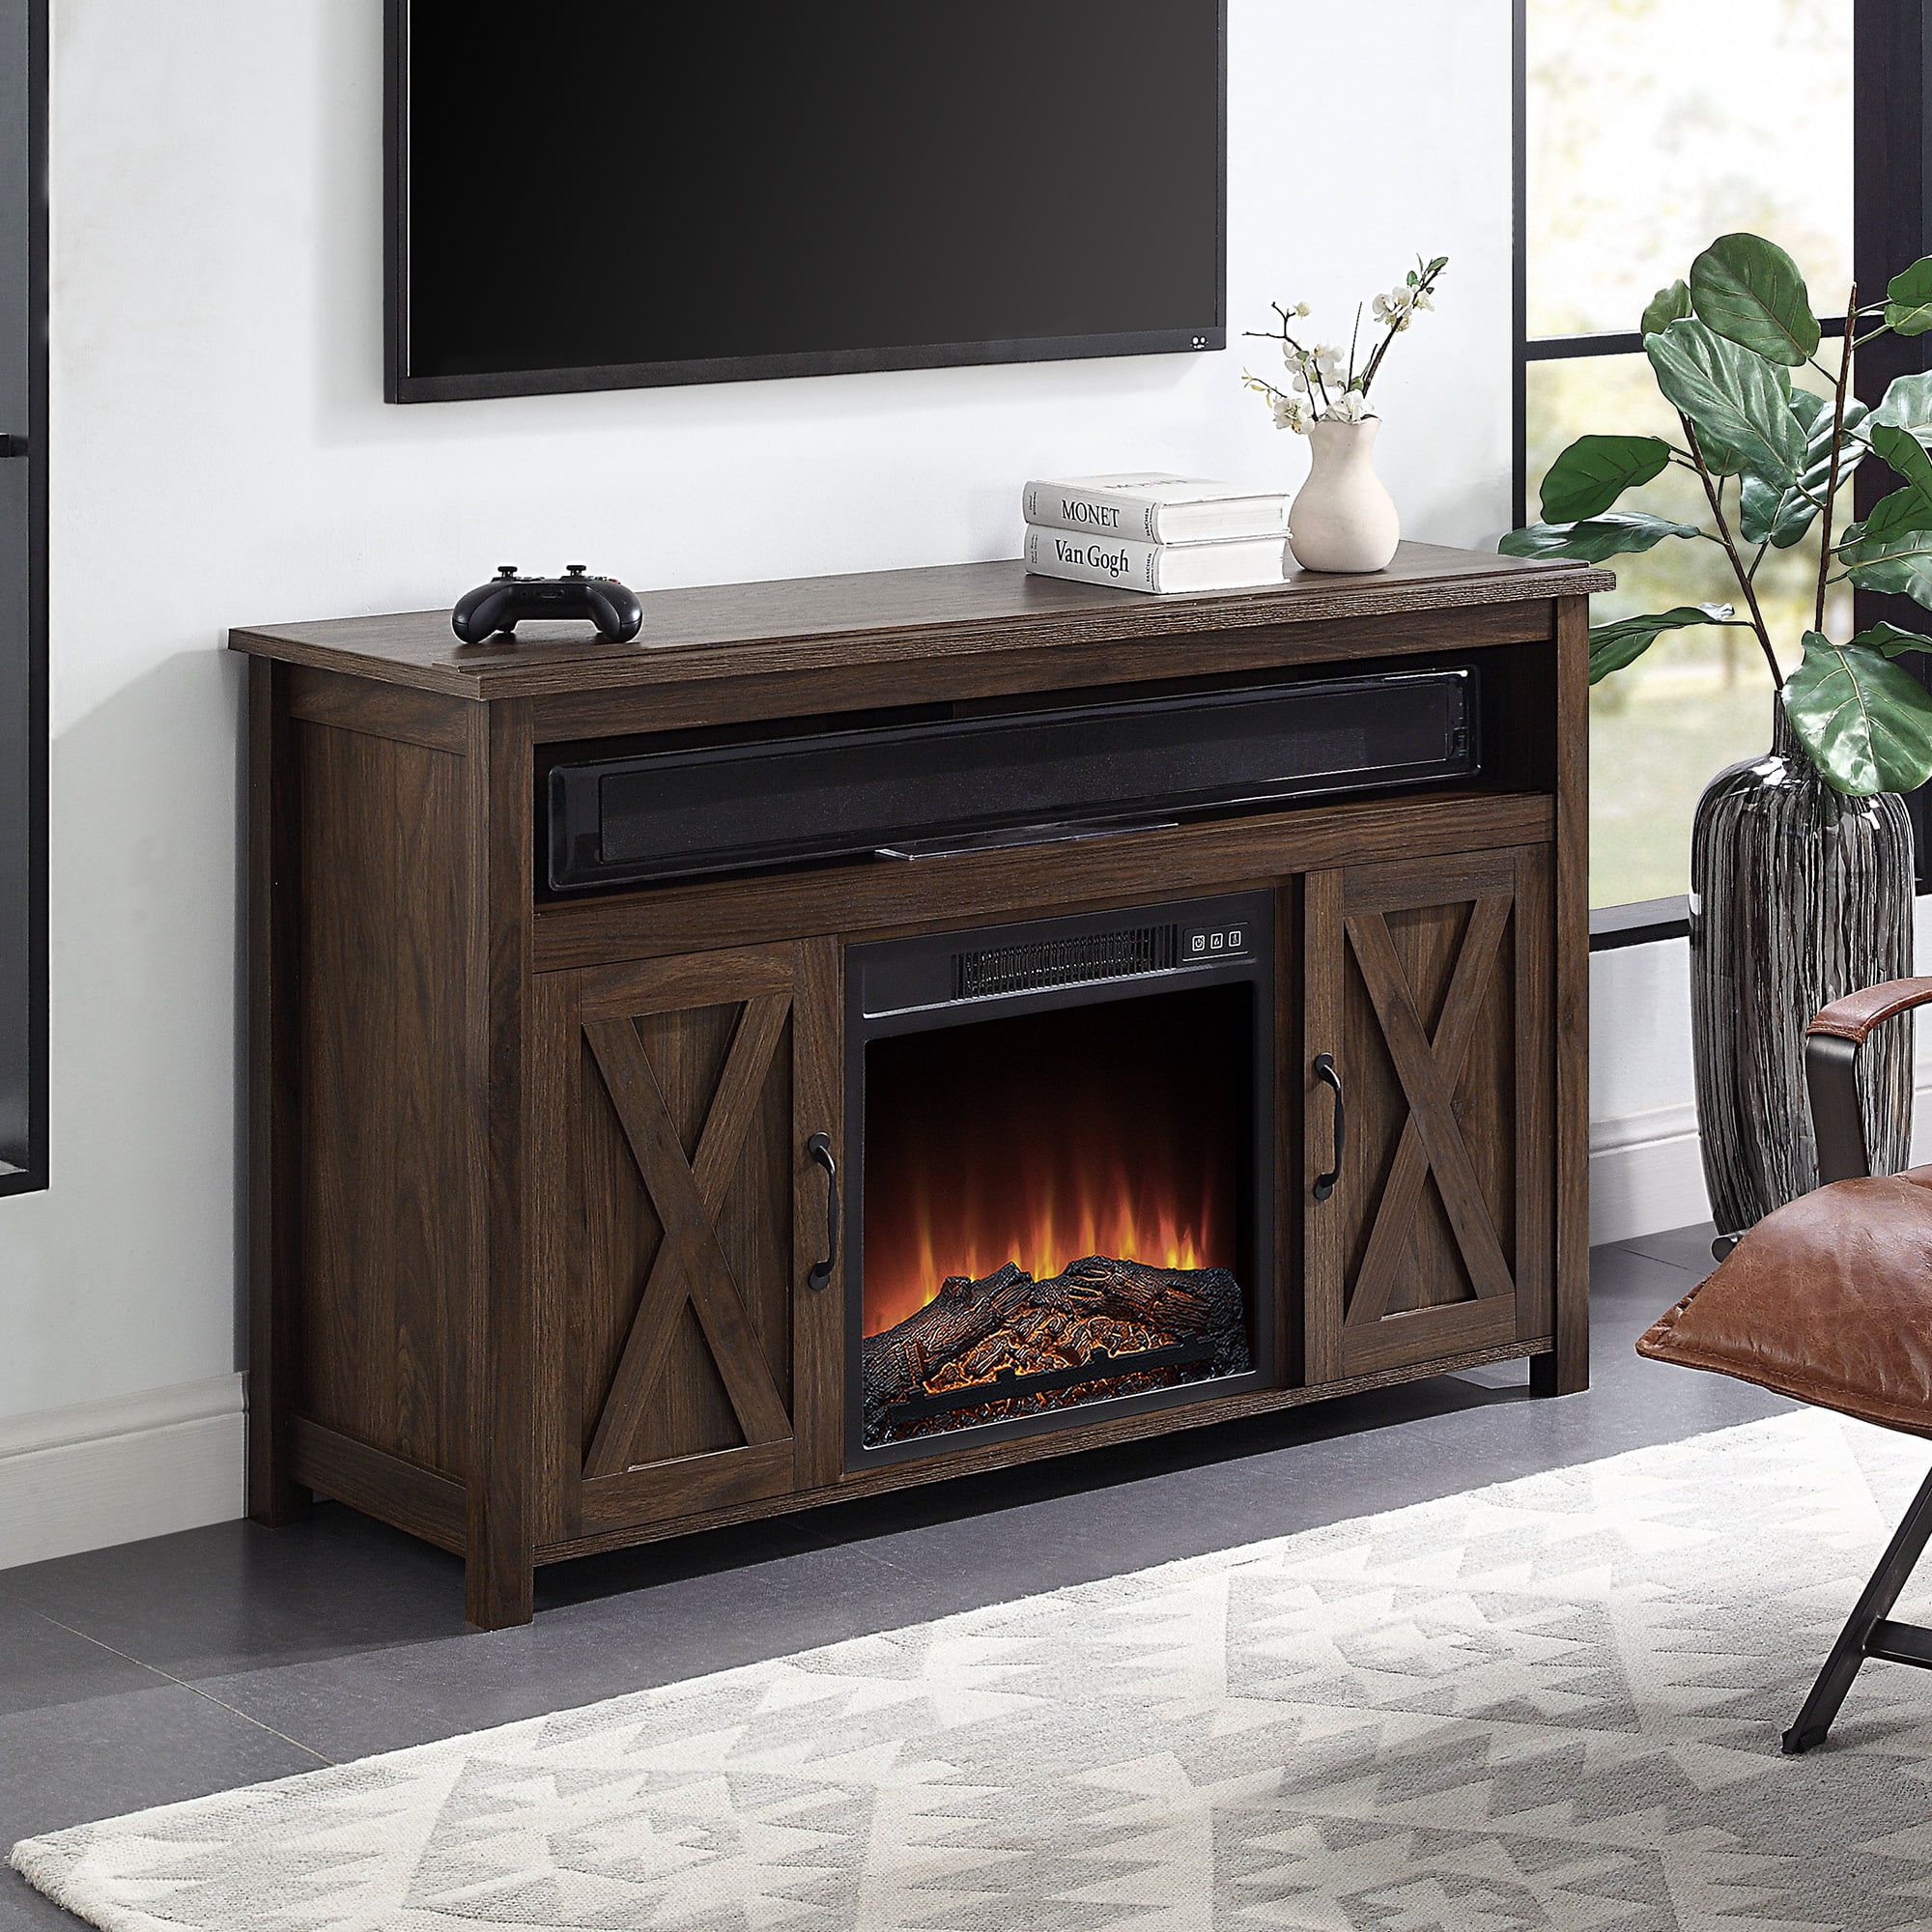 Belleze Tv Stand Console Electric Fireplace With Remote Control, 48" Or Intended For Tv Stands With Electric Fireplace (View 9 of 20)